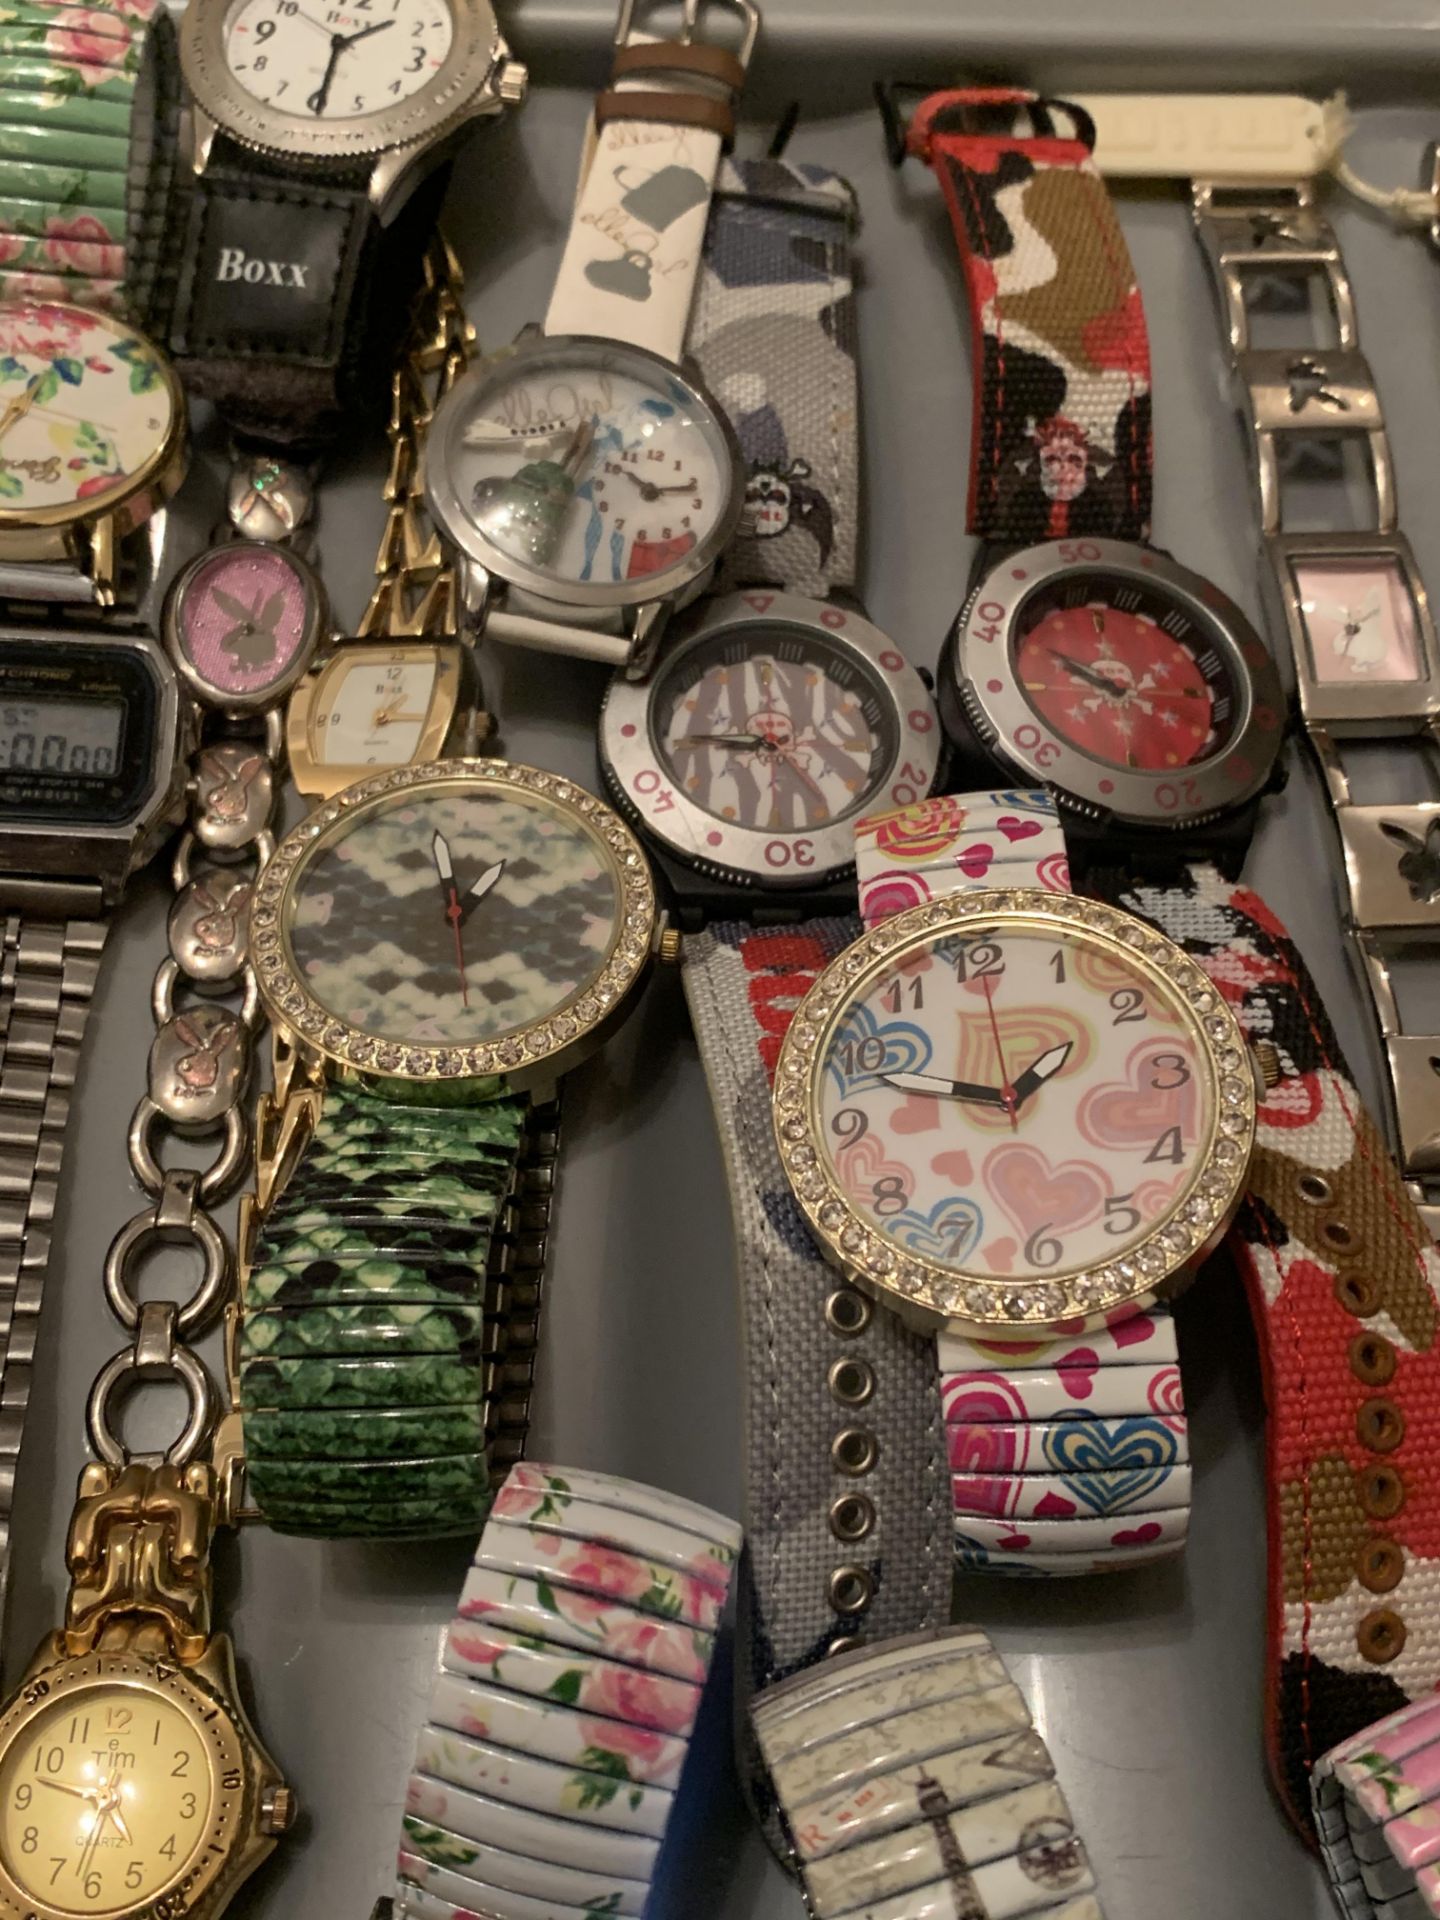 Job Lot Assorted Fashion Wrist Watches Ladies And Gents - Image 6 of 8